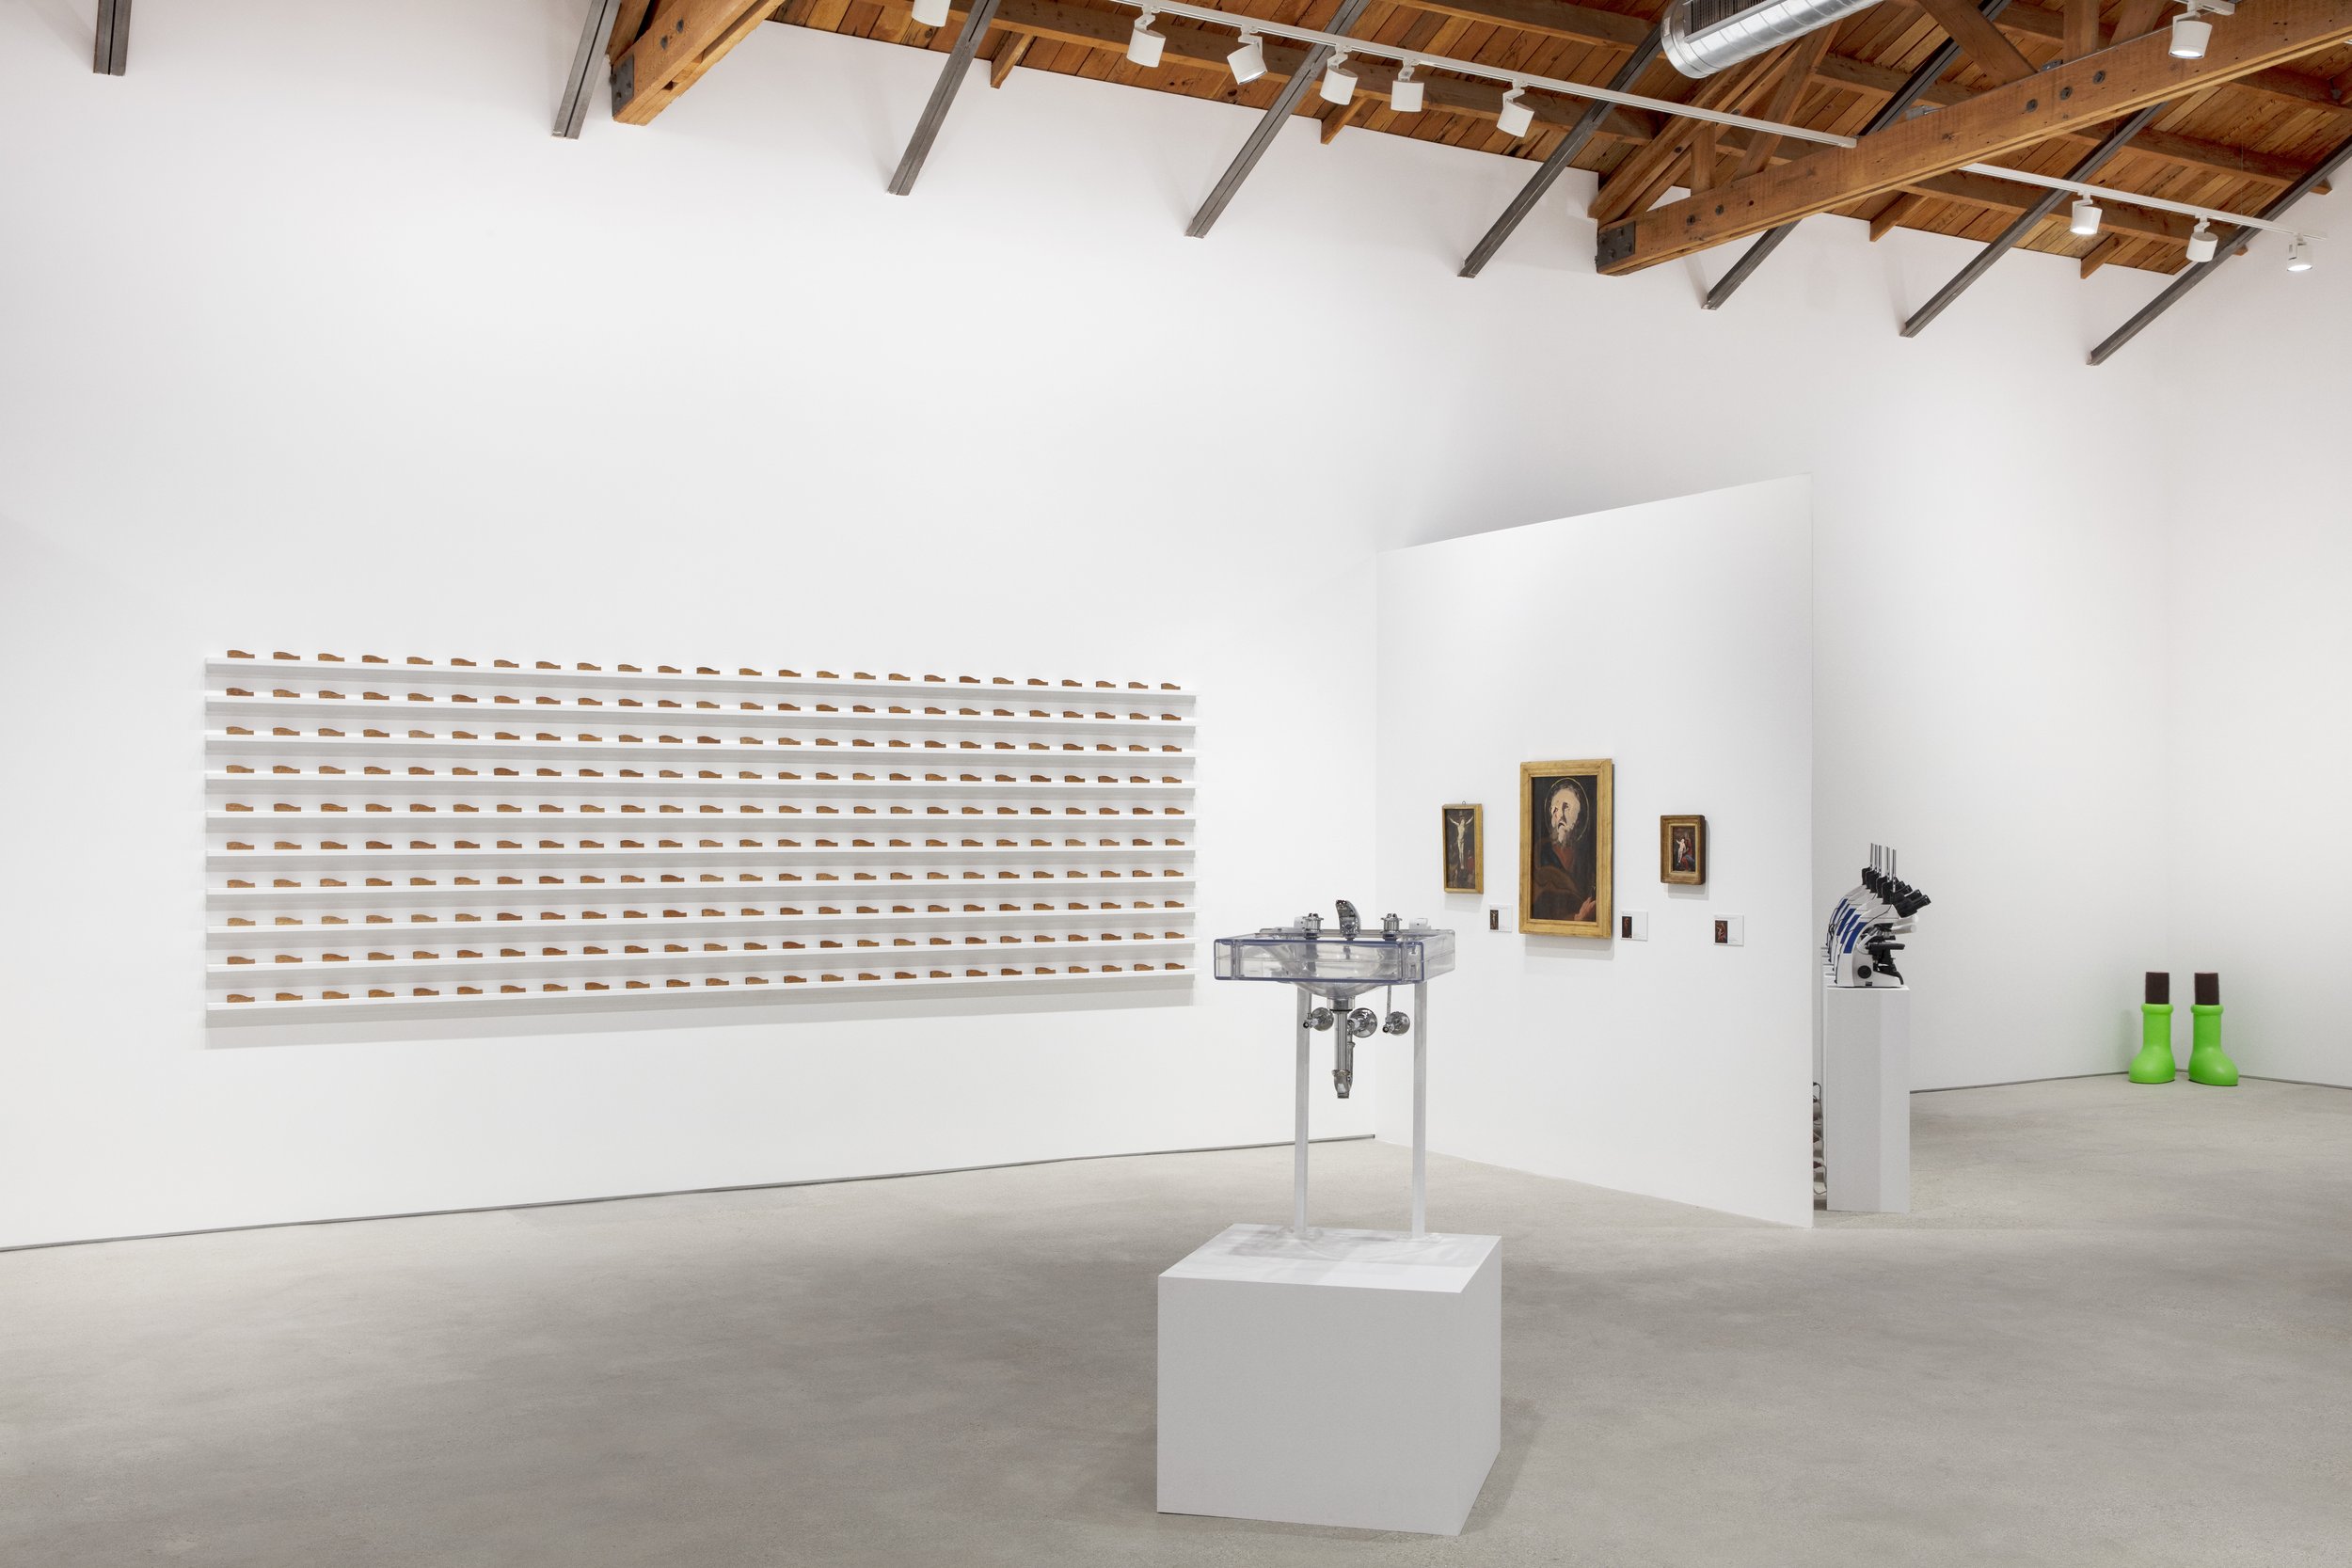  Installation view of MSCHF:  Art 2  at Perrotin Los Angeles, 2024. Photographer: Guillaume Ziccarelli. Courtesy of MSCHF and Perrotin.  